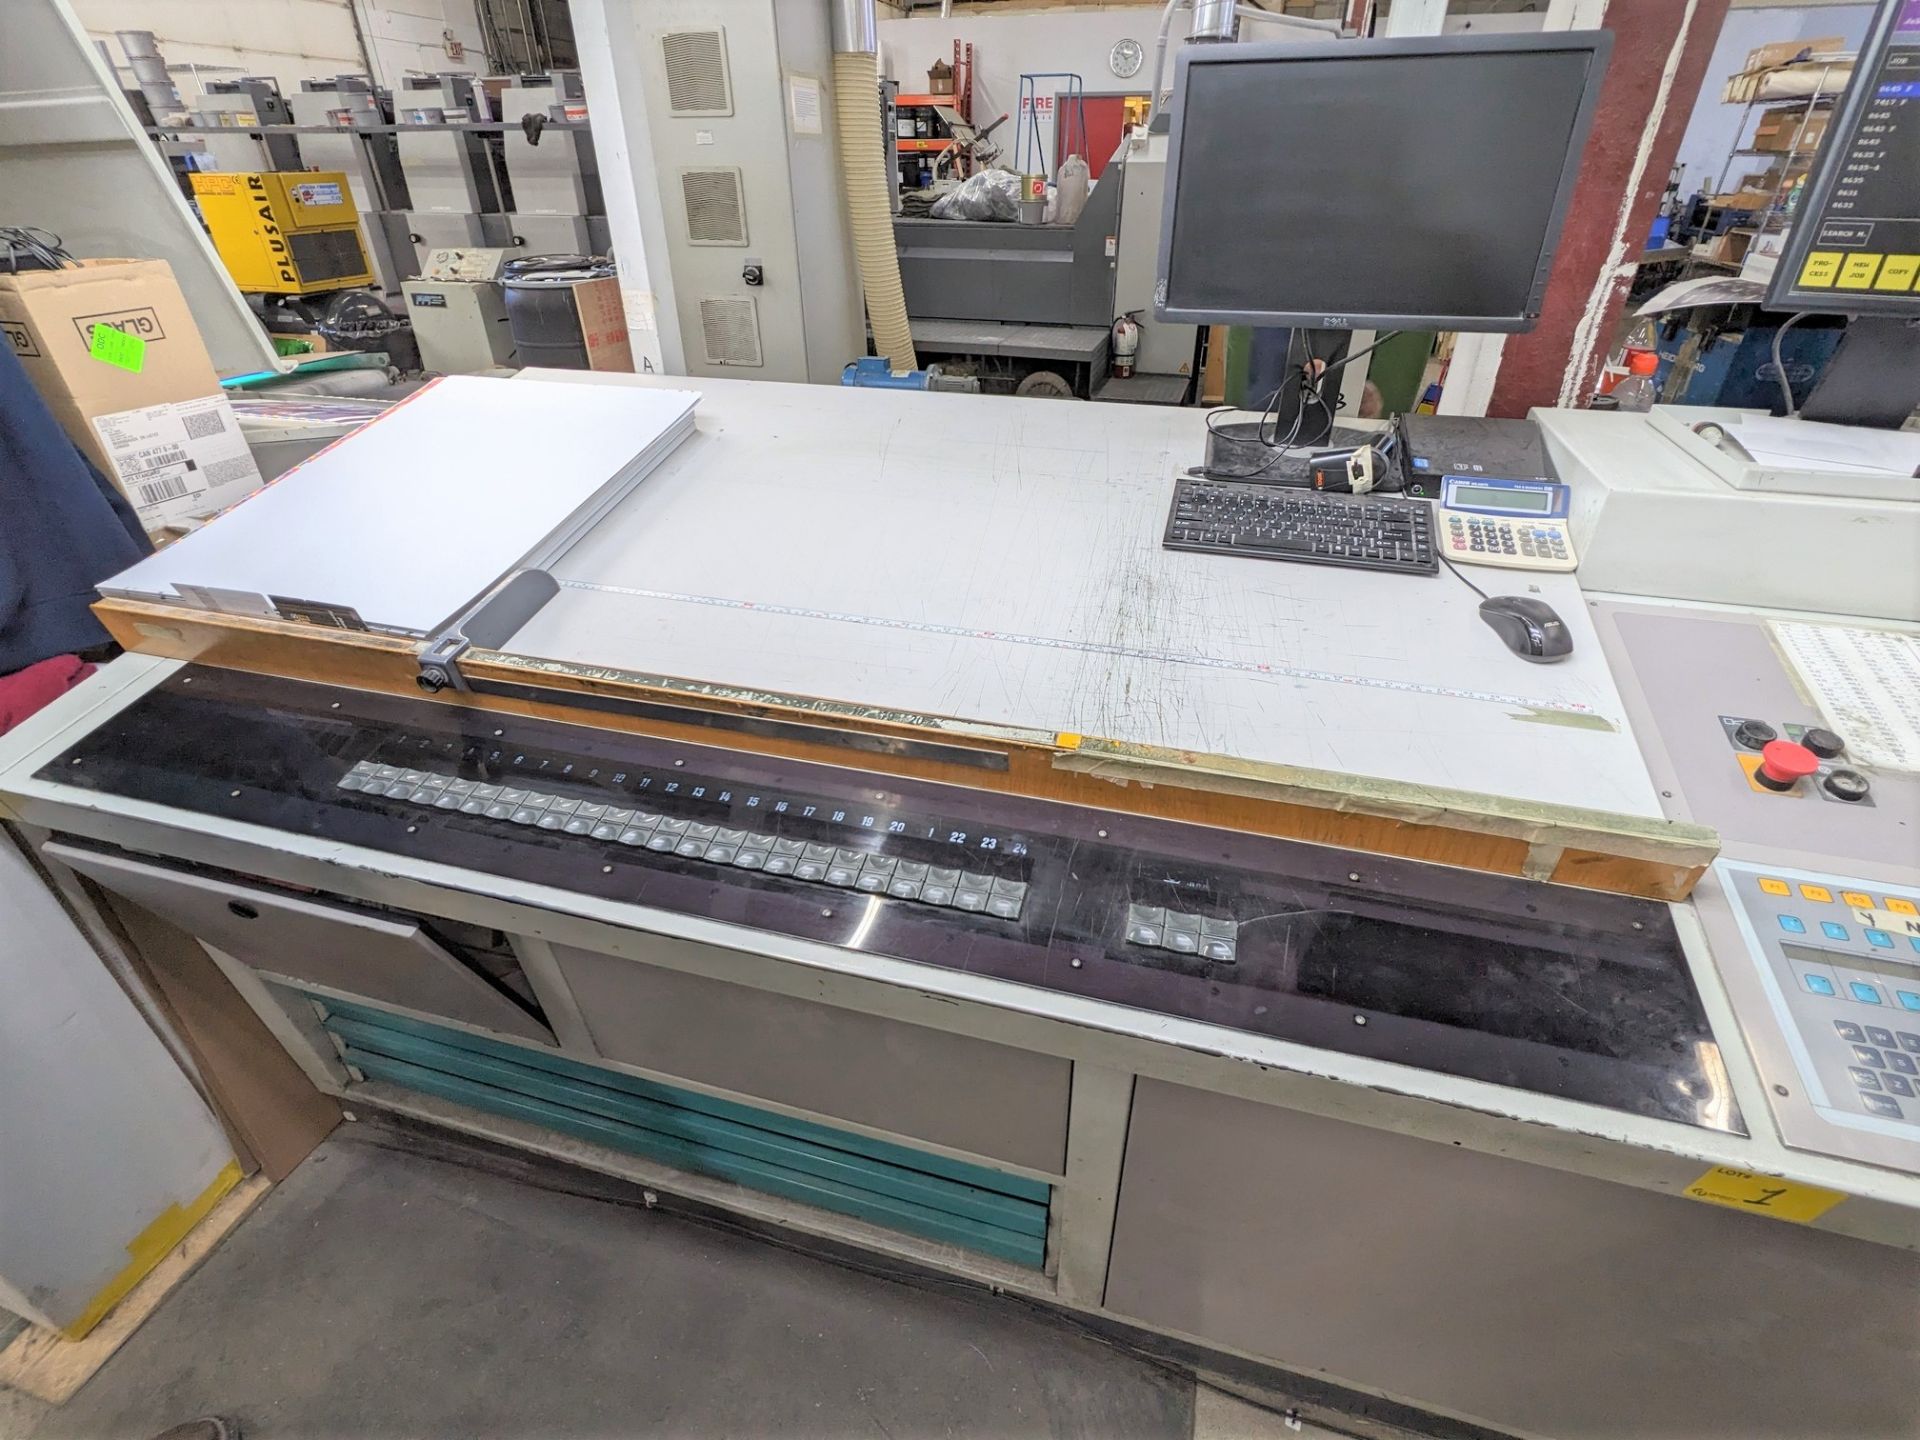 1995 MAN ROLAND 300 6-COLOUR OFFSET PRINTING PRESS, MODEL R306, S/N 25152B, TOTAL SHEET COUNT - Image 51 of 53